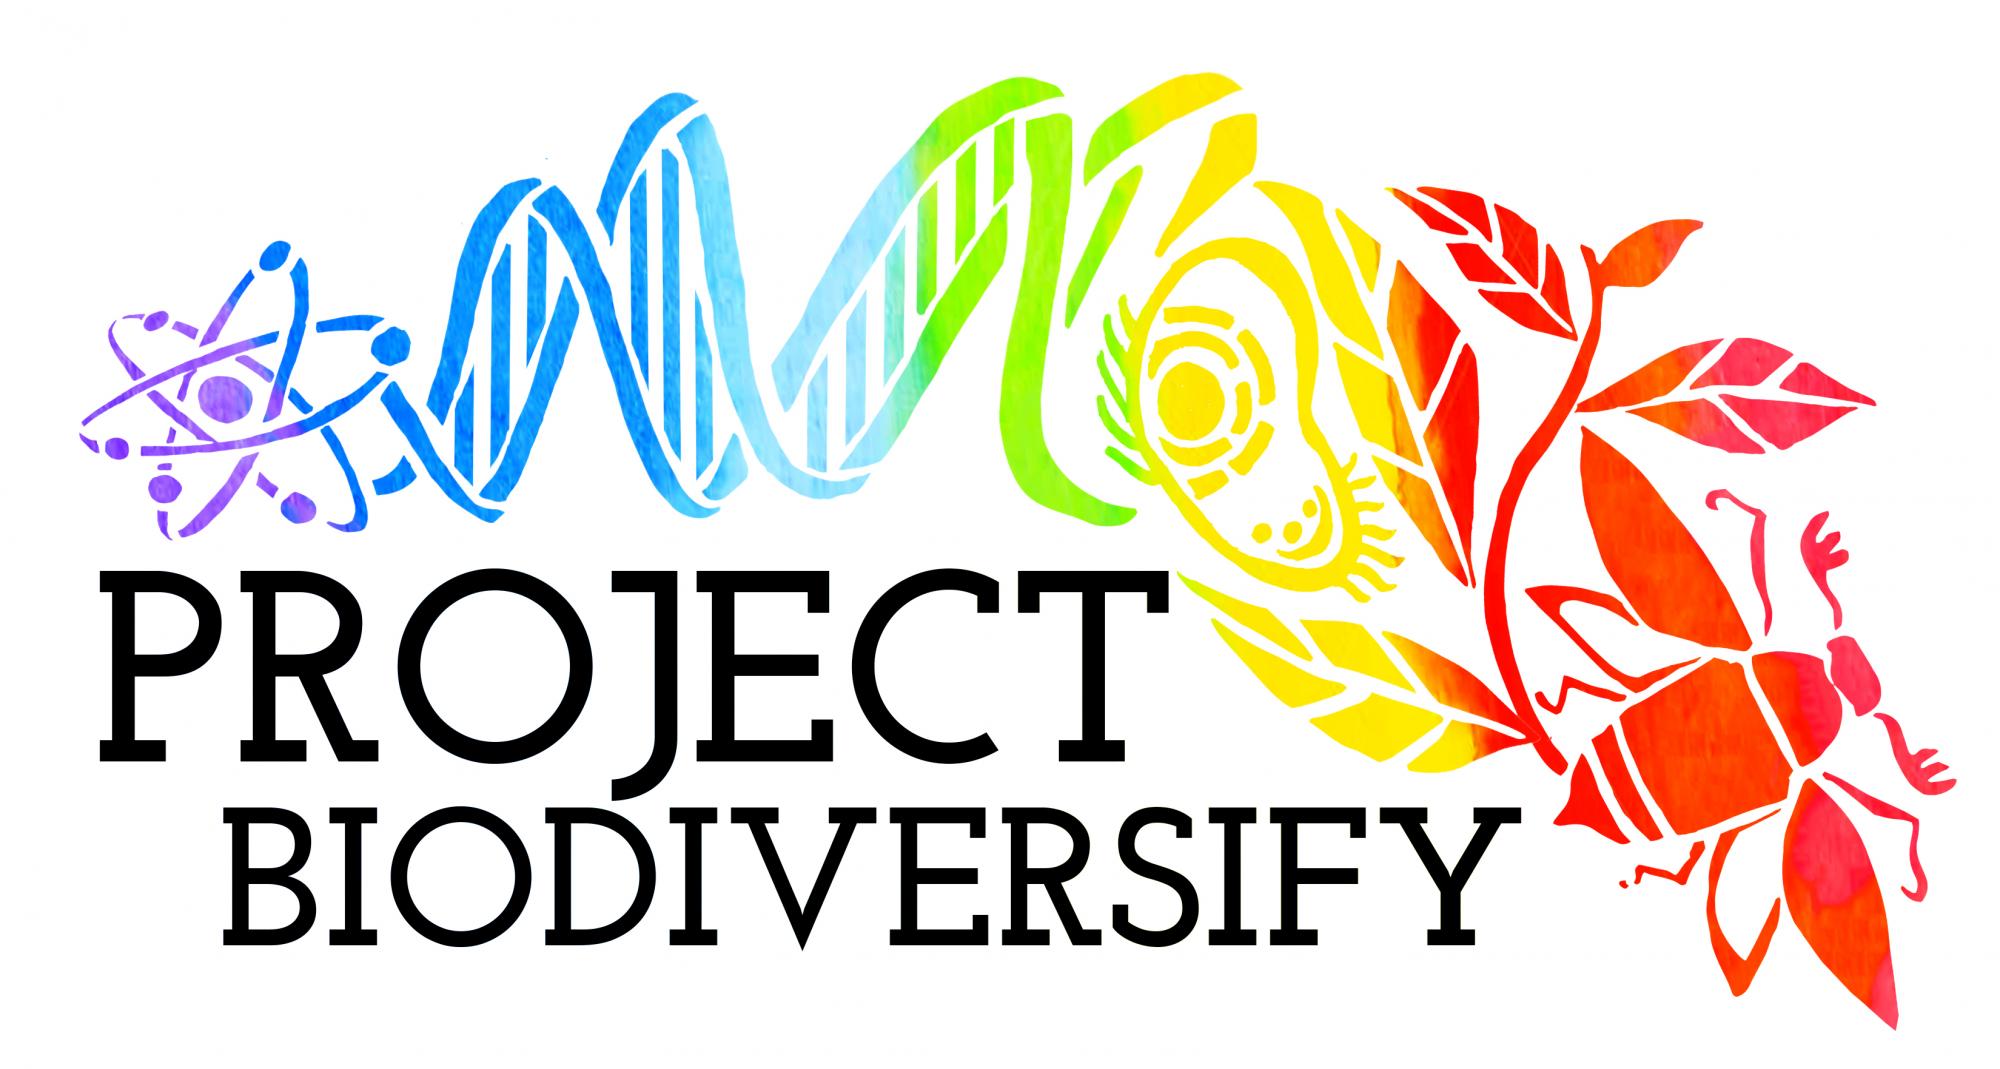 Project Biodiversify text